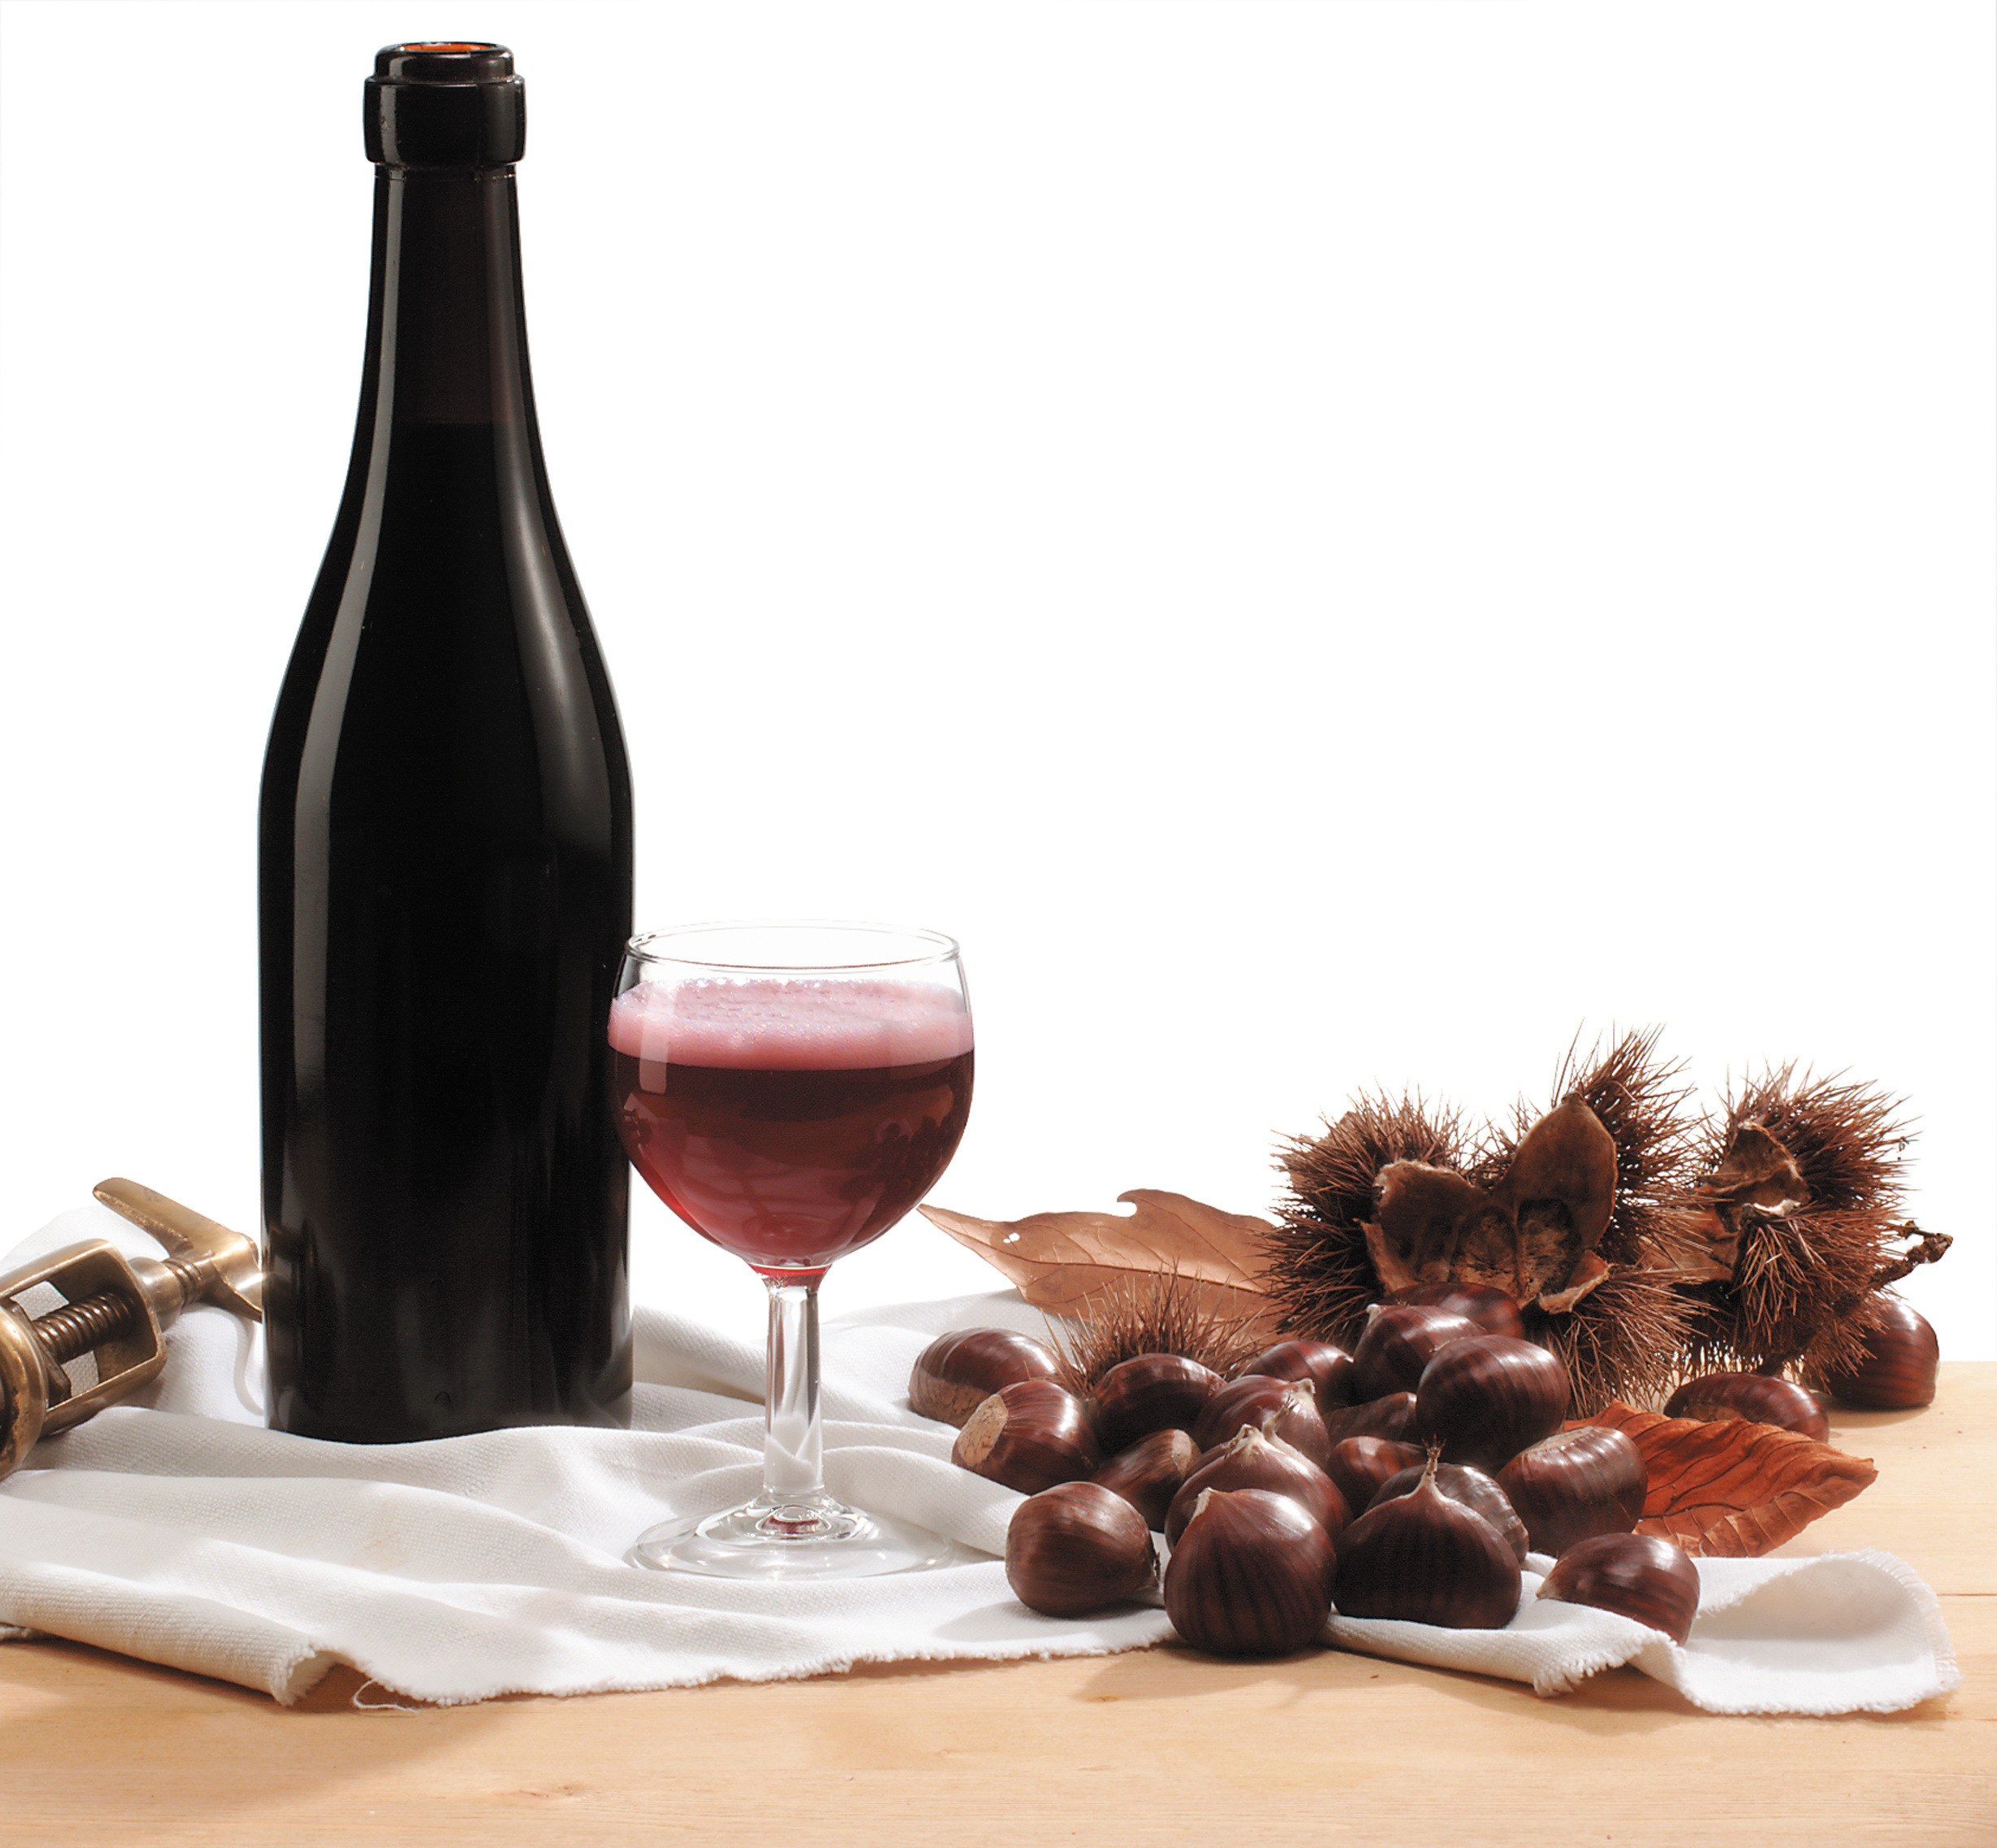 Lambrusco Day celebrated with a glass full of bubbly red sparkling wine from Italy